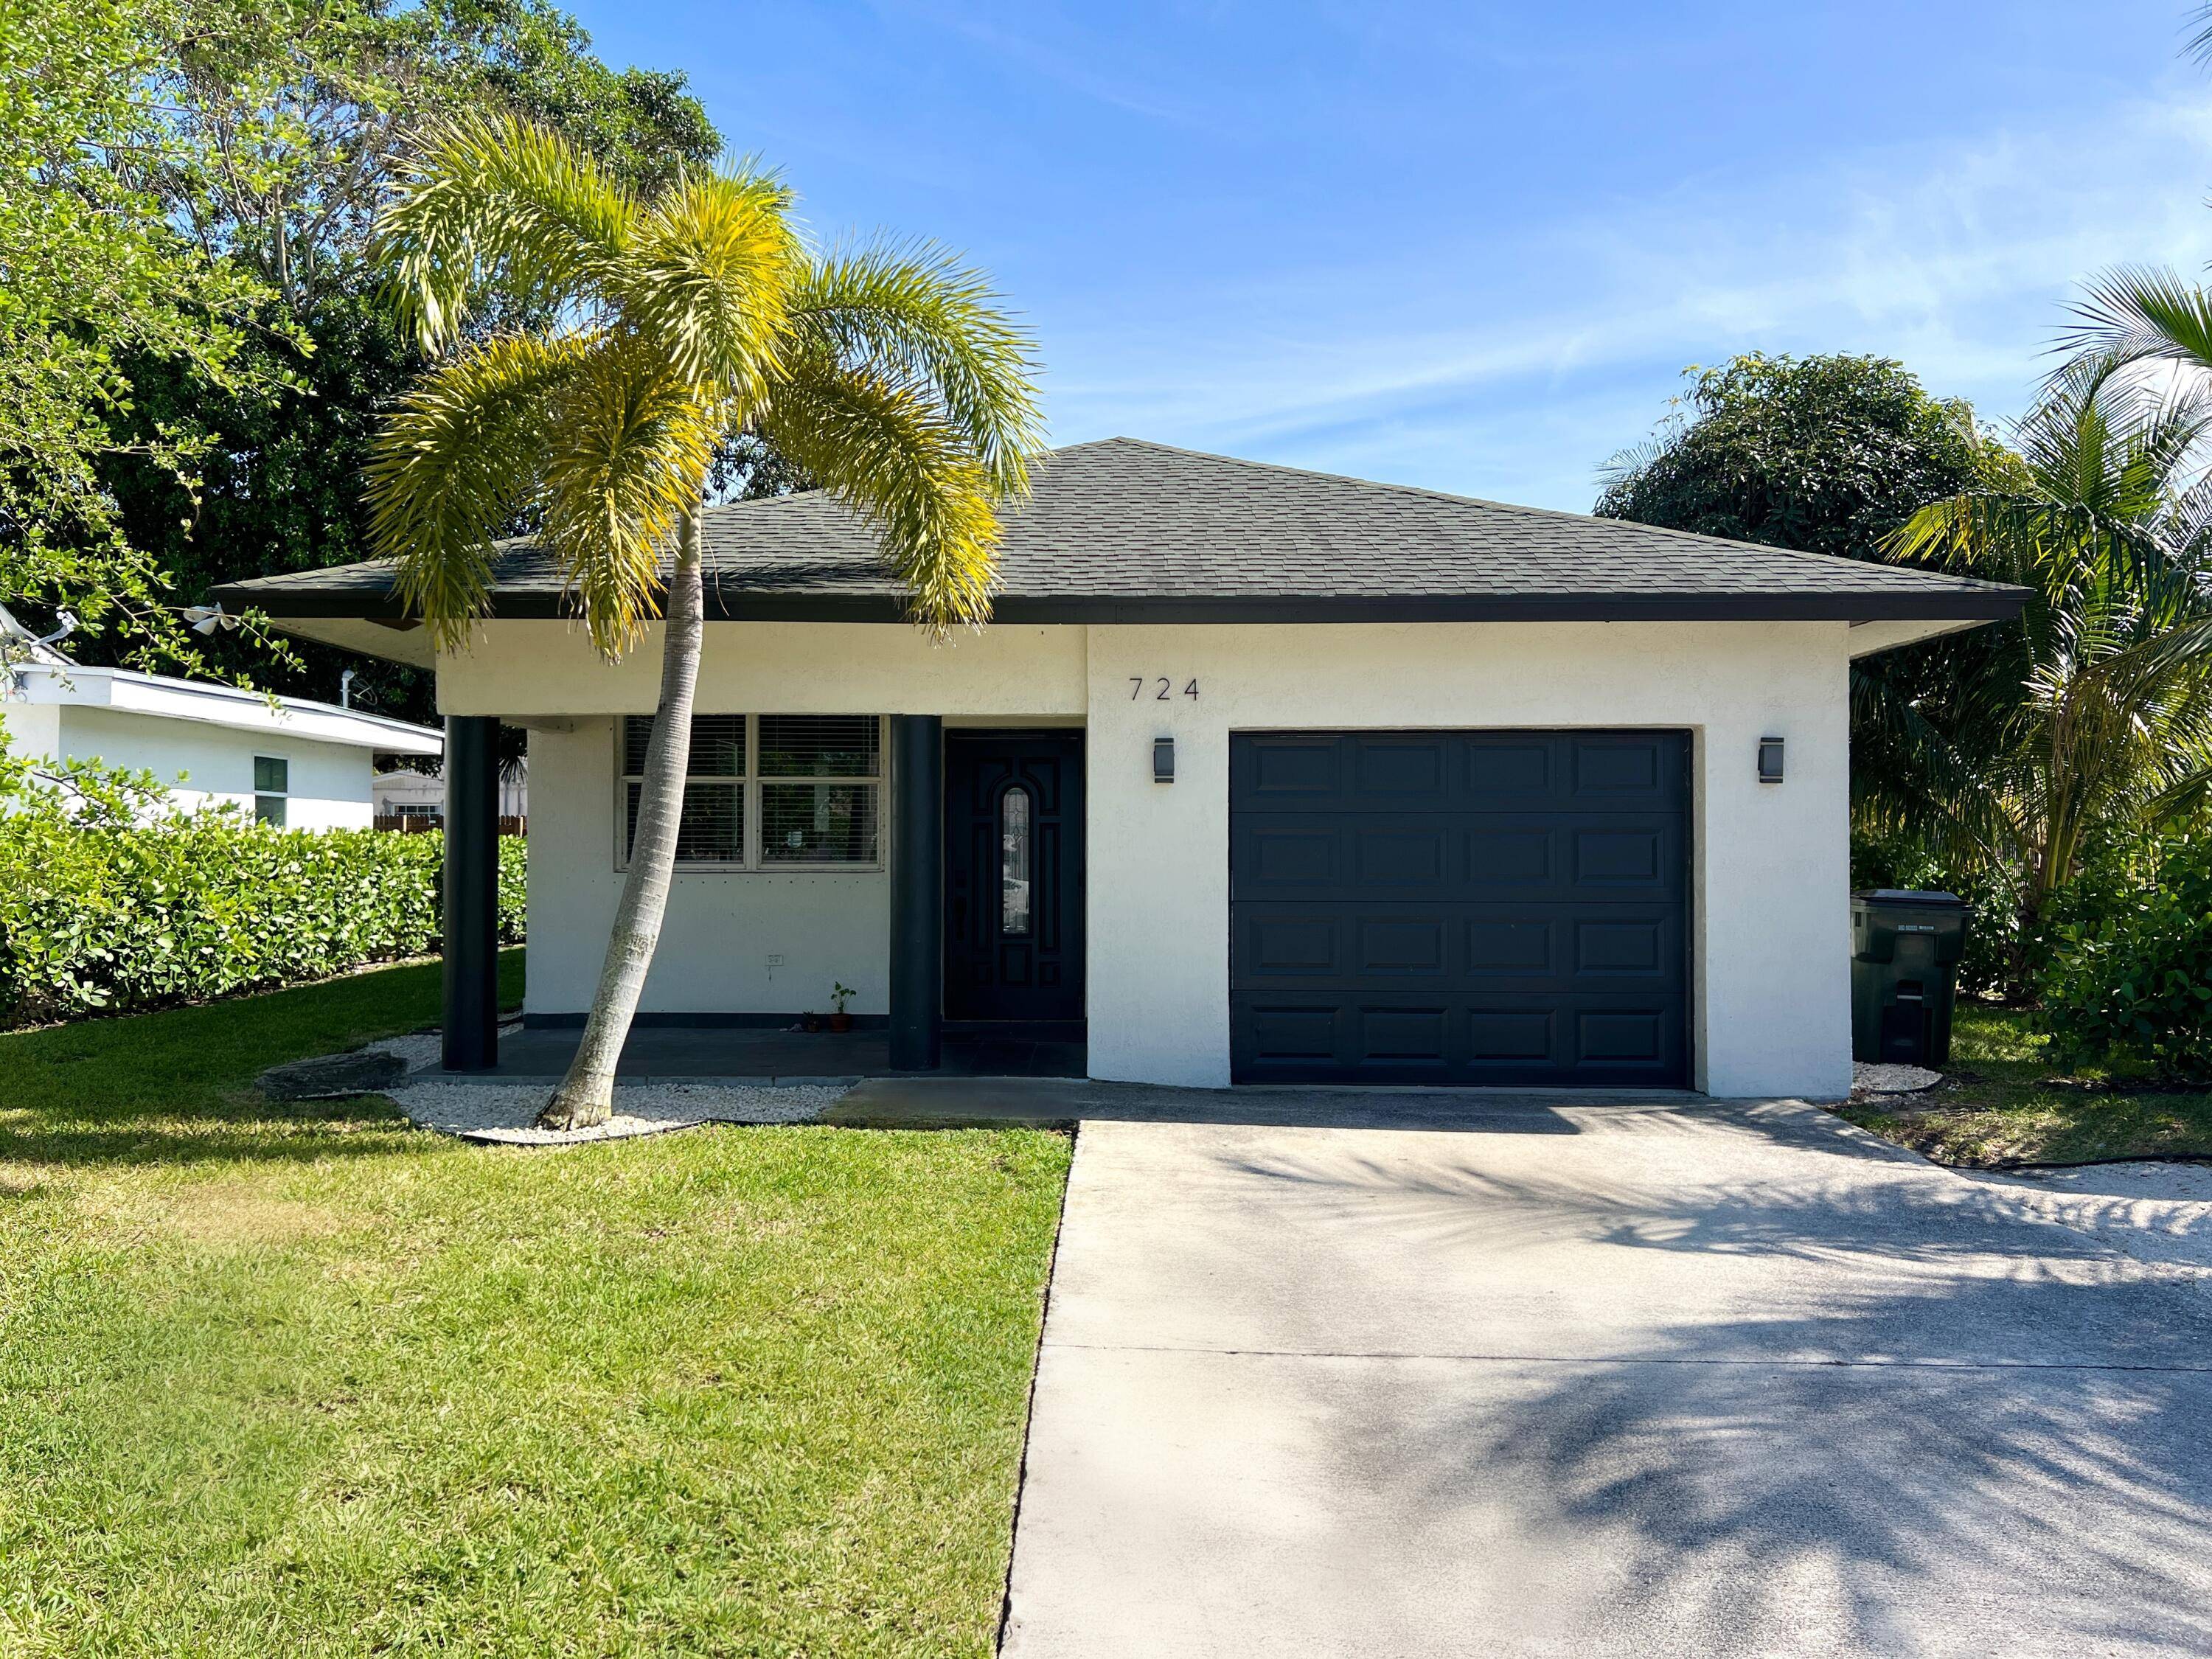 Step into this beautifully renovated 4 bedroom, 3 bathroom, single family home nestled in the heart of Downtown Delray Beach.